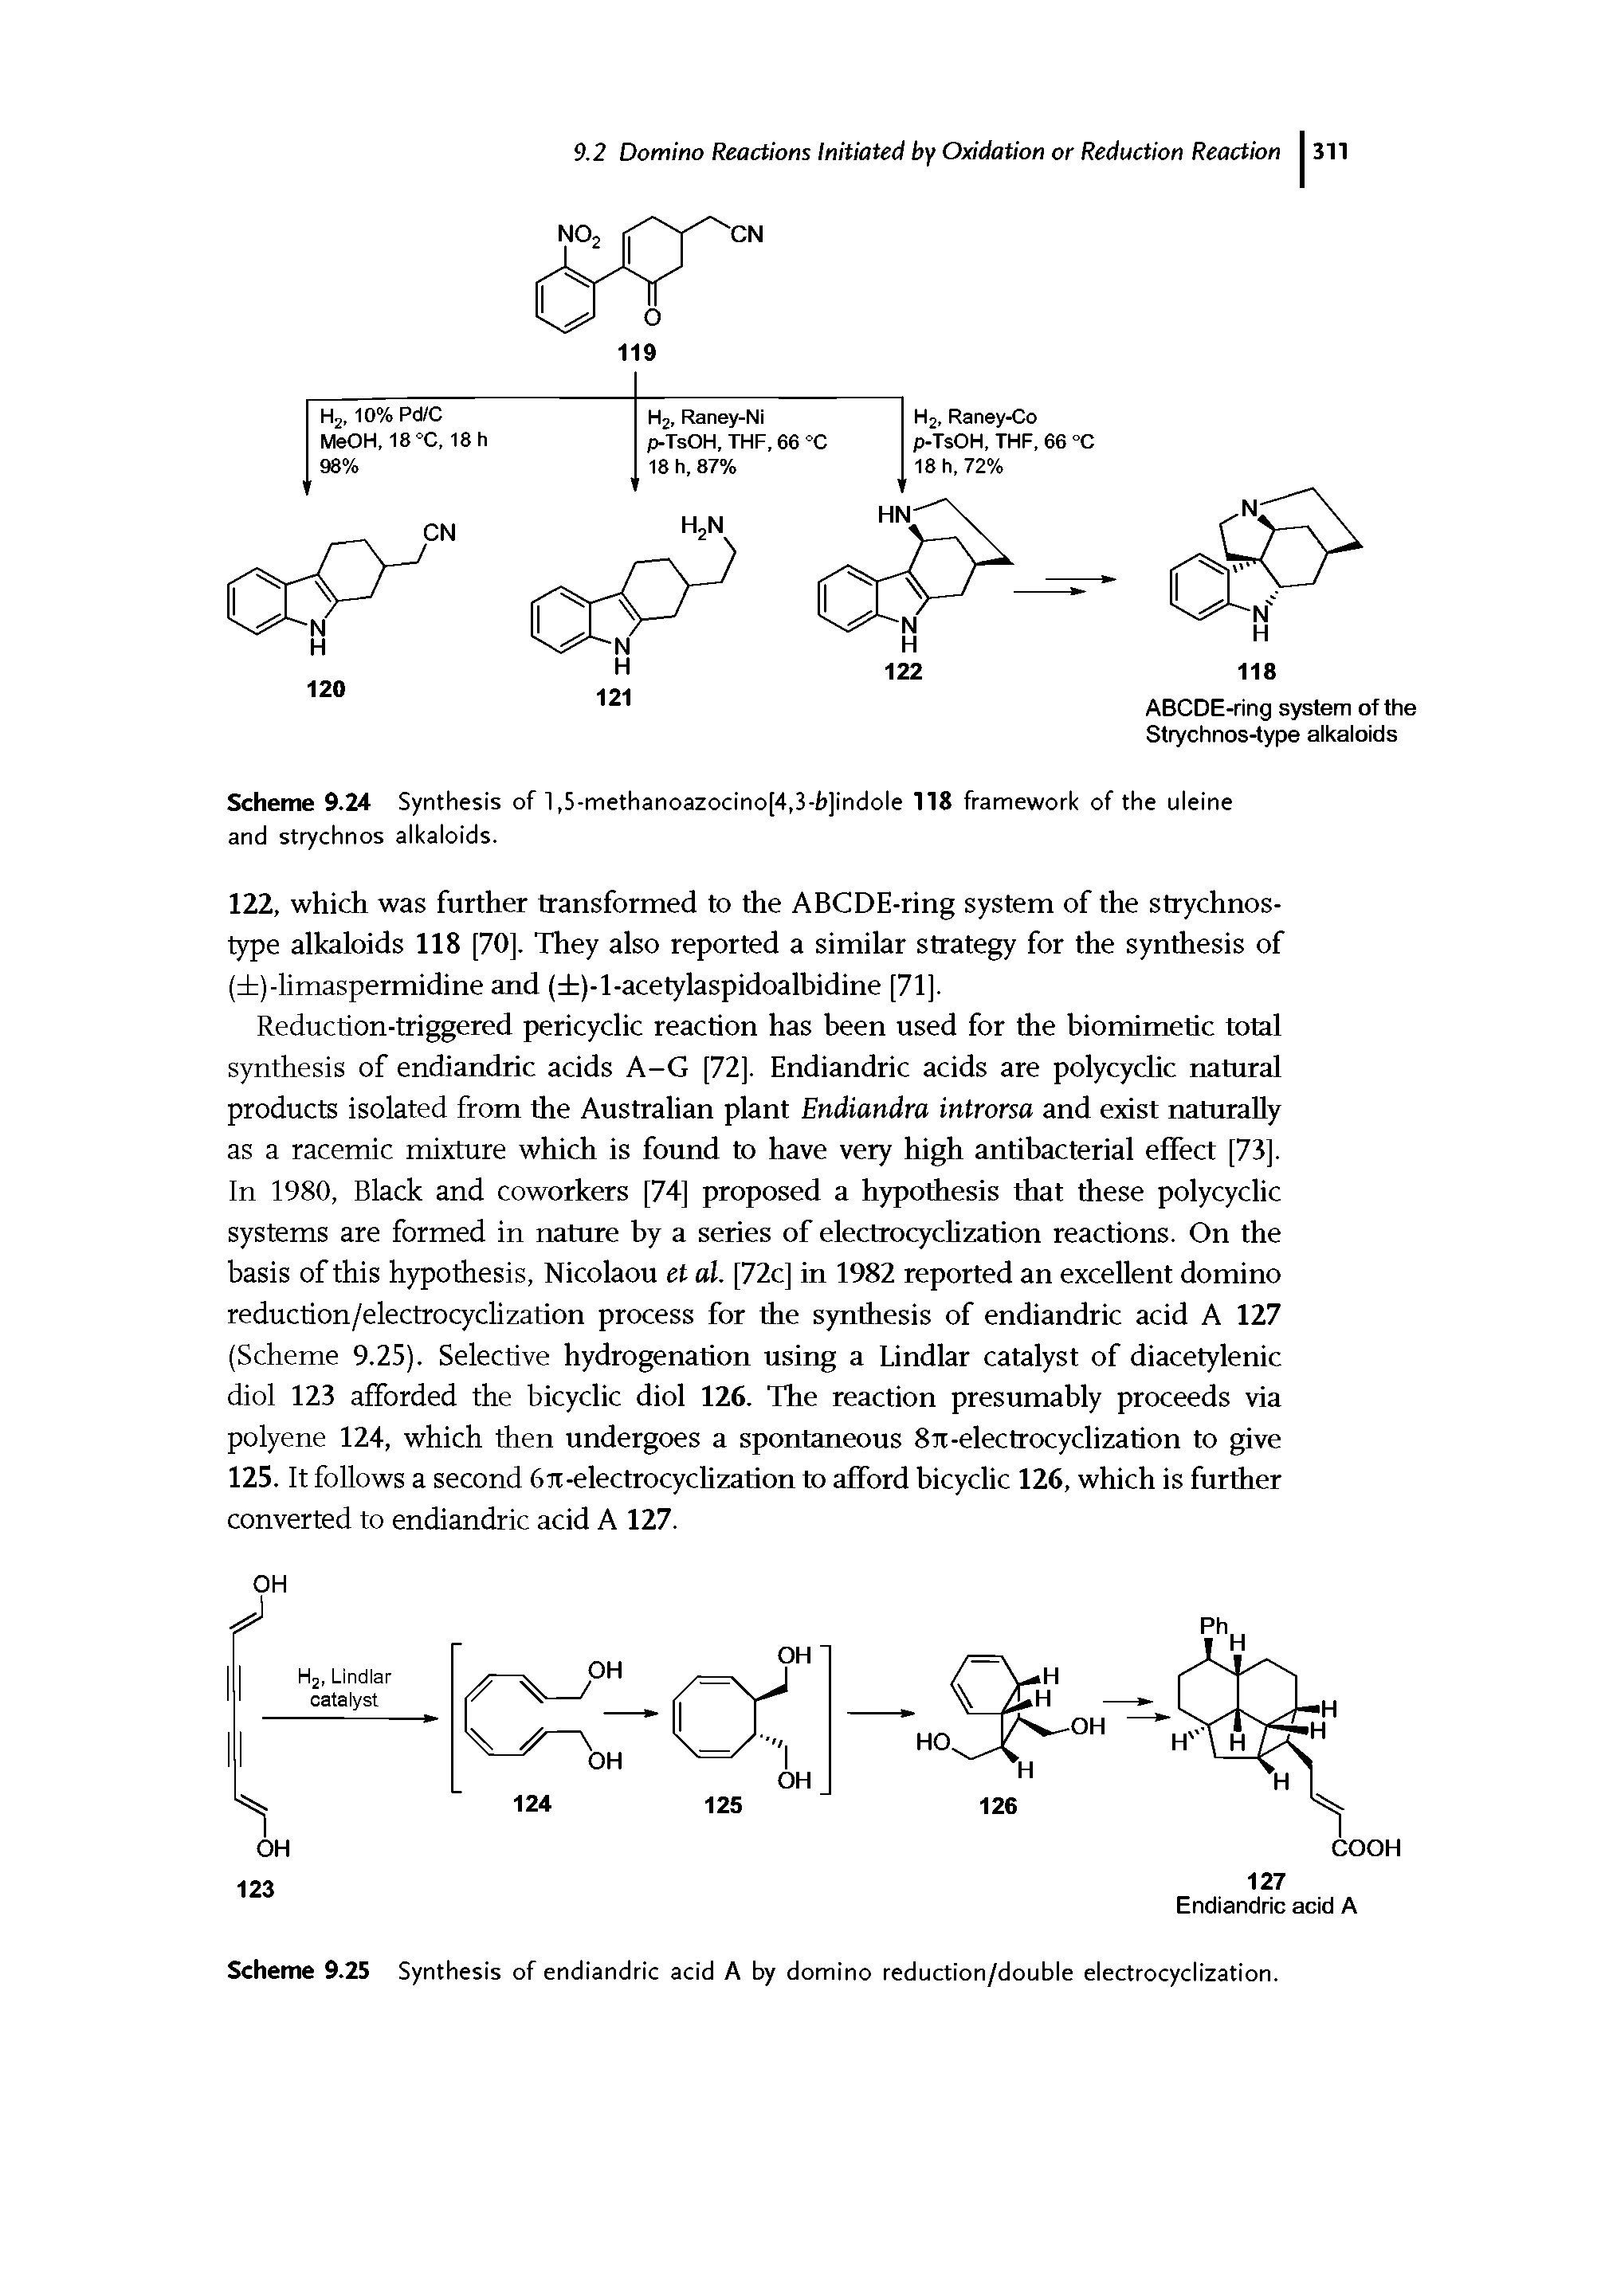 Scheme 9.25 Synthesis of endiandric acid A by domino reduction/double electrocyclization.